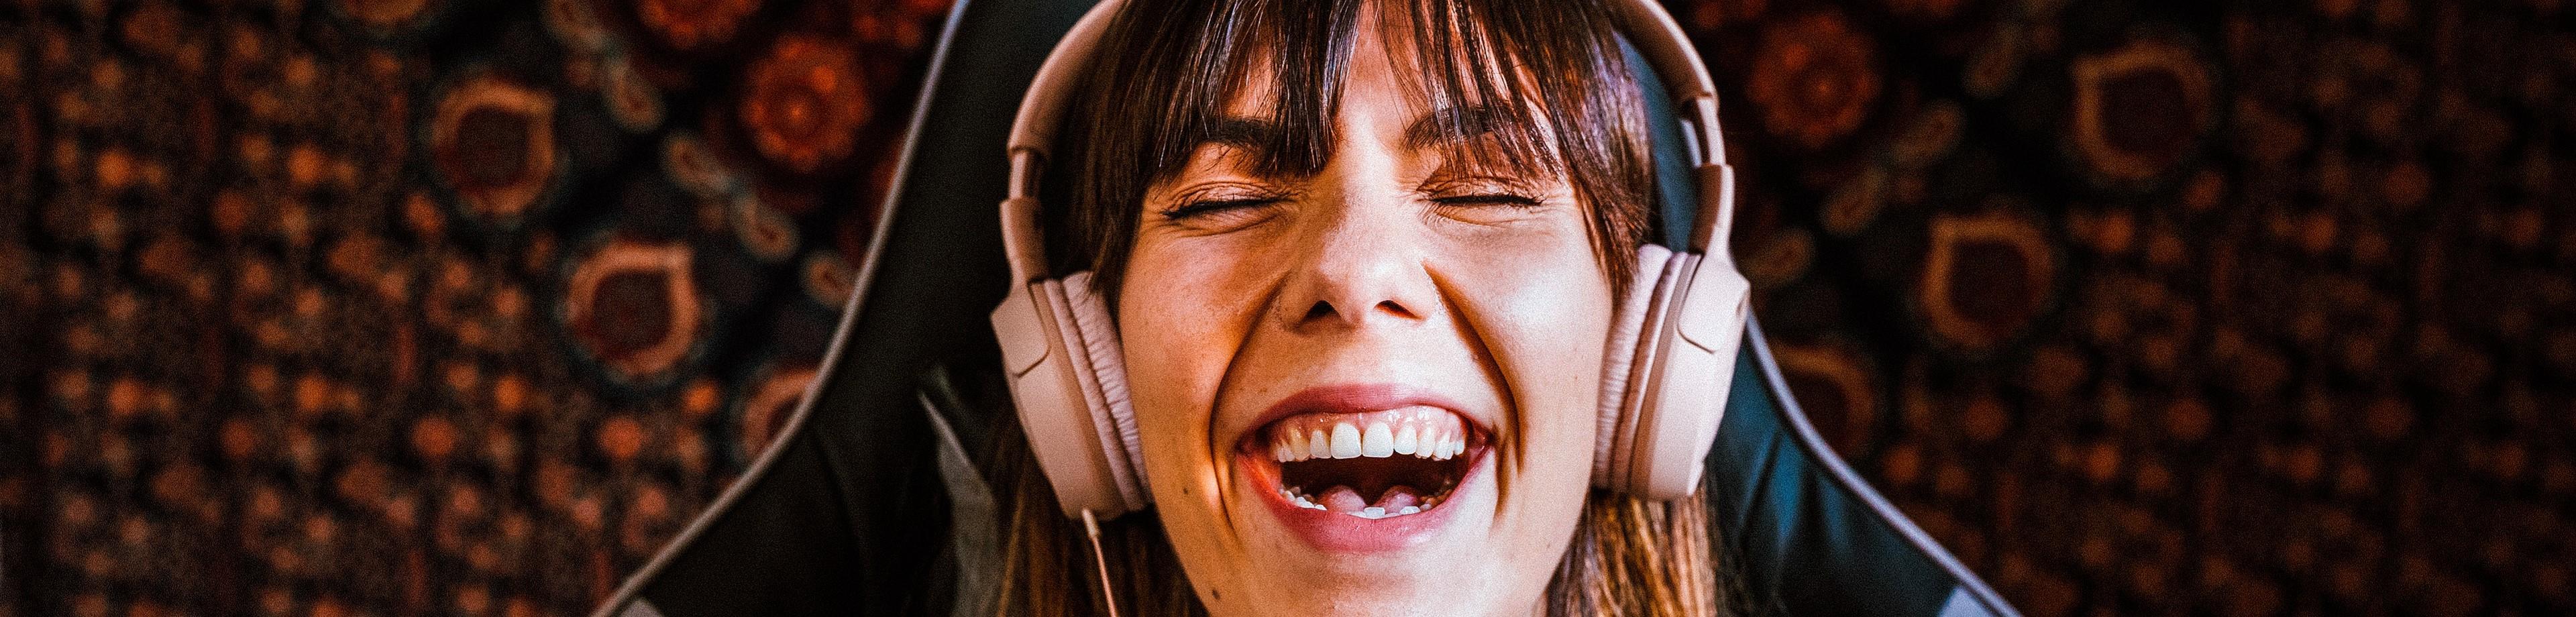 Young woman laughing as she listens to something on headphones and holds her smarphone